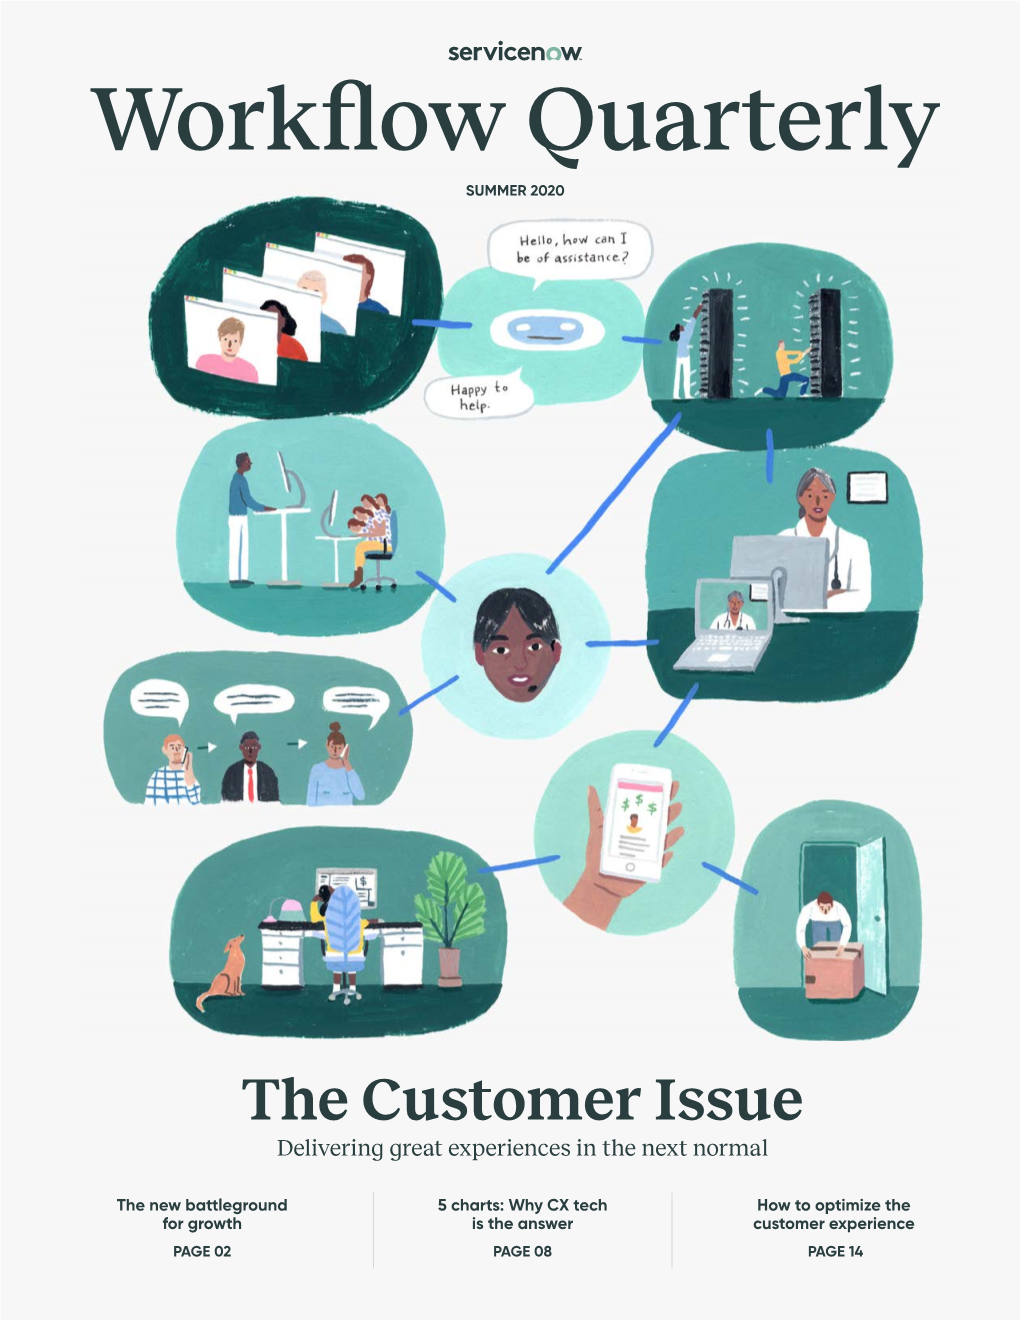 Workflow Quarterly the Customer Issue